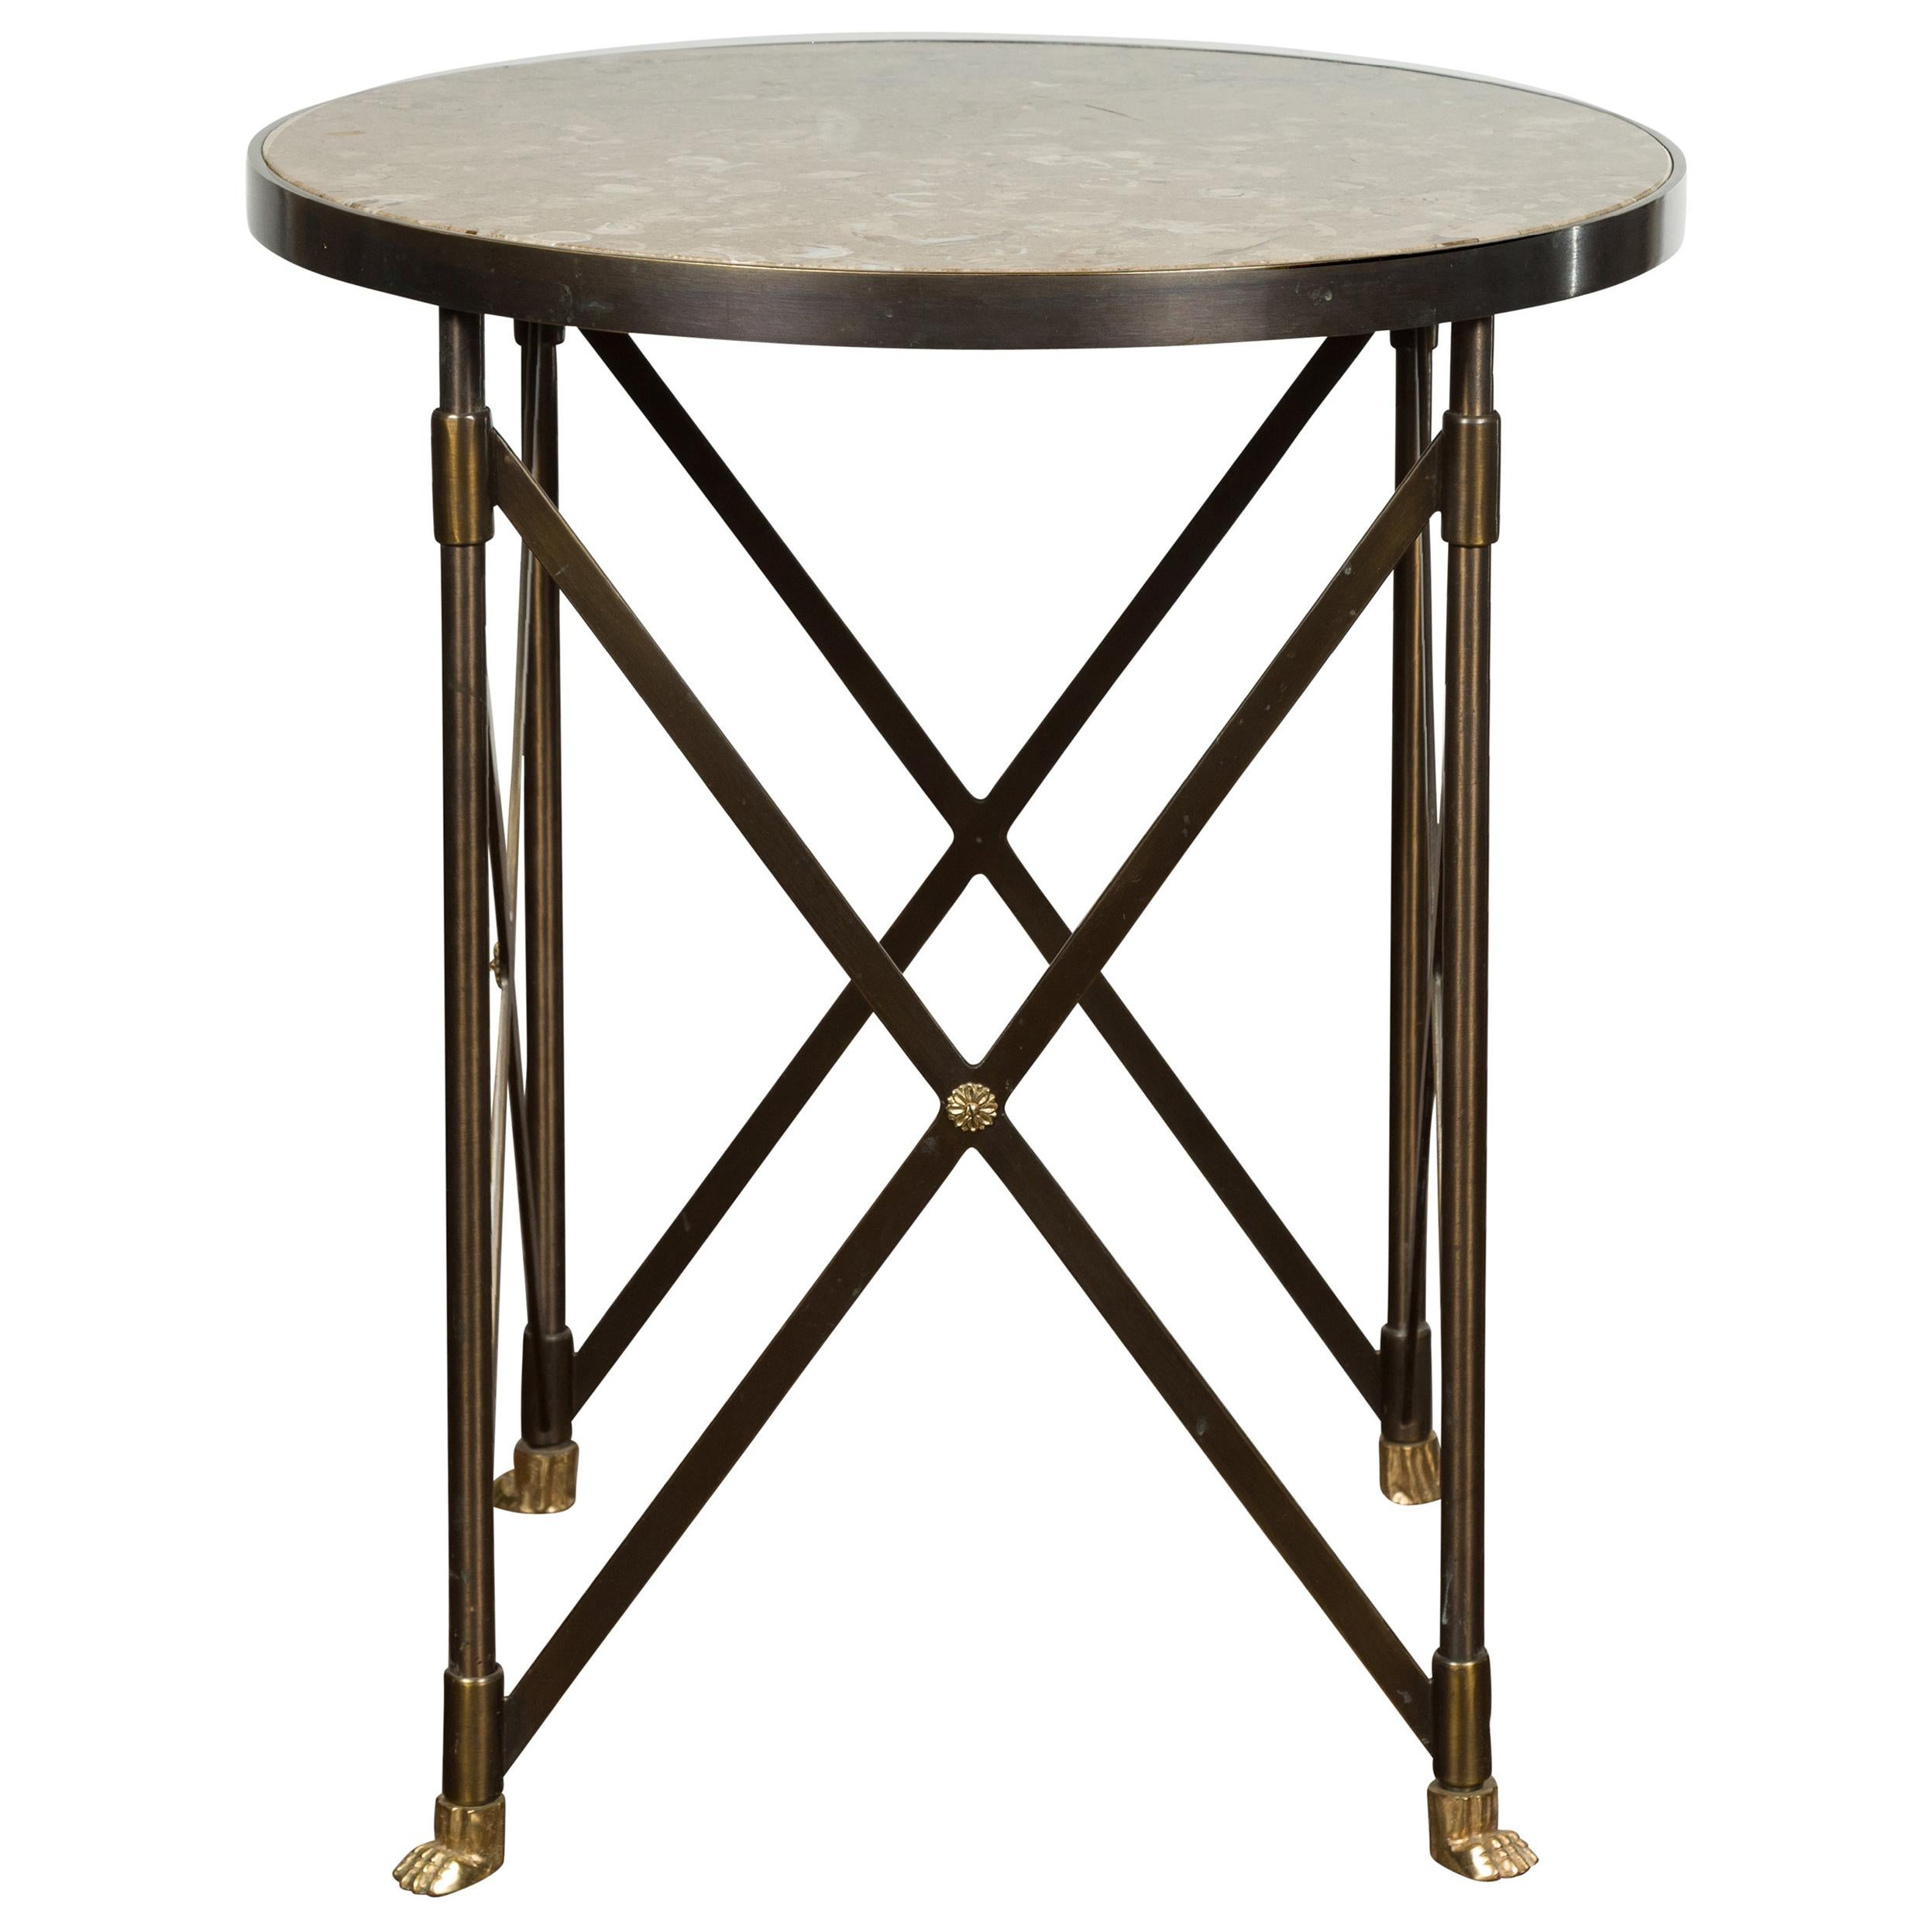 Italian Midcentury Bronze Side Table with Variegated Marble Top and Paw Feet